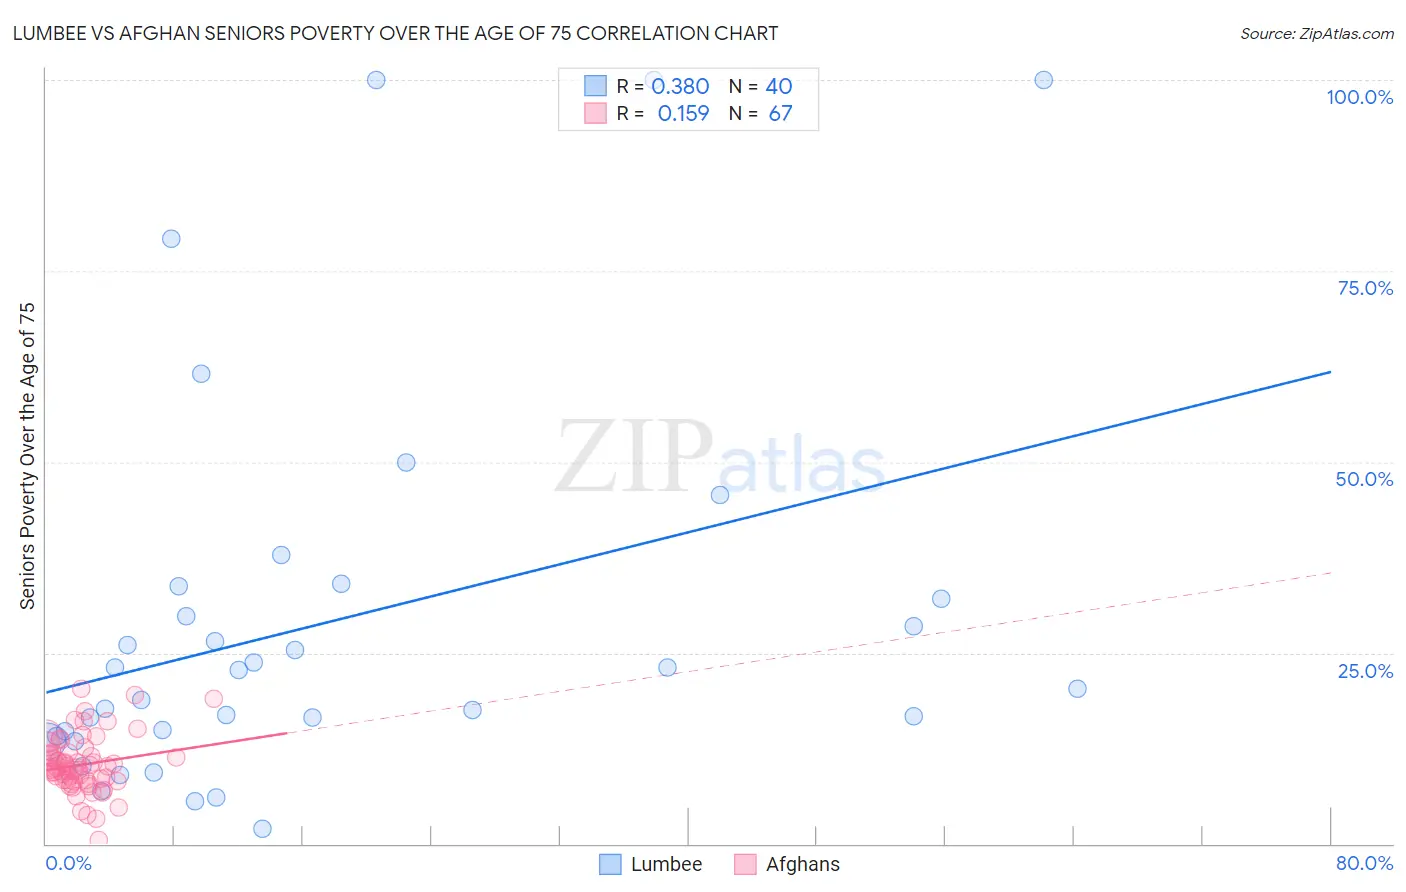 Lumbee vs Afghan Seniors Poverty Over the Age of 75